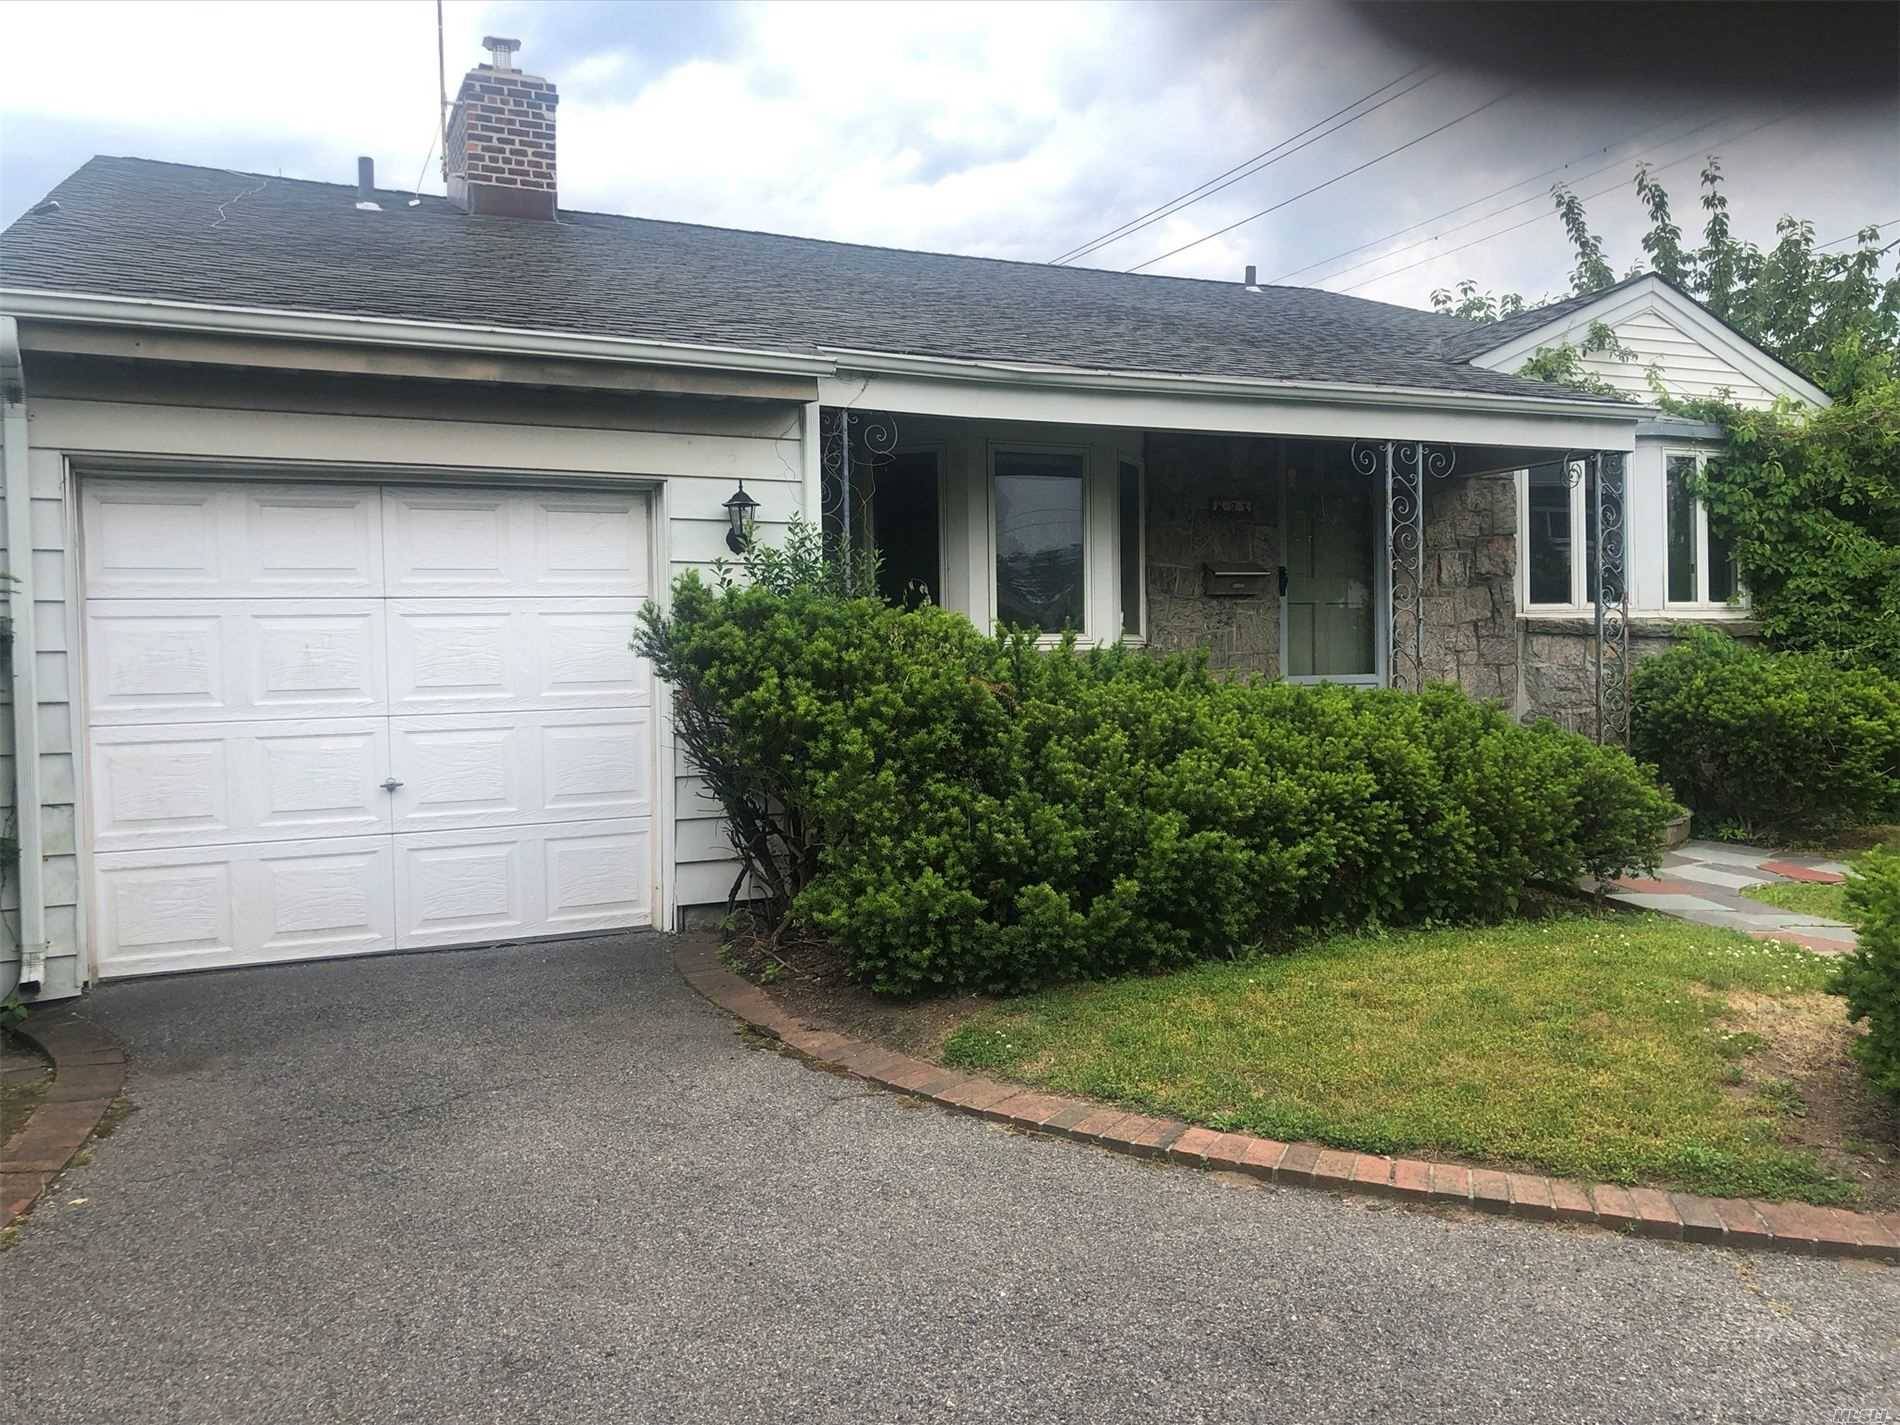 Spacious 6 Bedroom Home, LR W Vaulted Ceilings amp ; Fplc, Oversized Den W Fplc, Lg Family Rm, CAC, 5 Bedrooms On One Level, Close To RR, Shopping amp ; ...